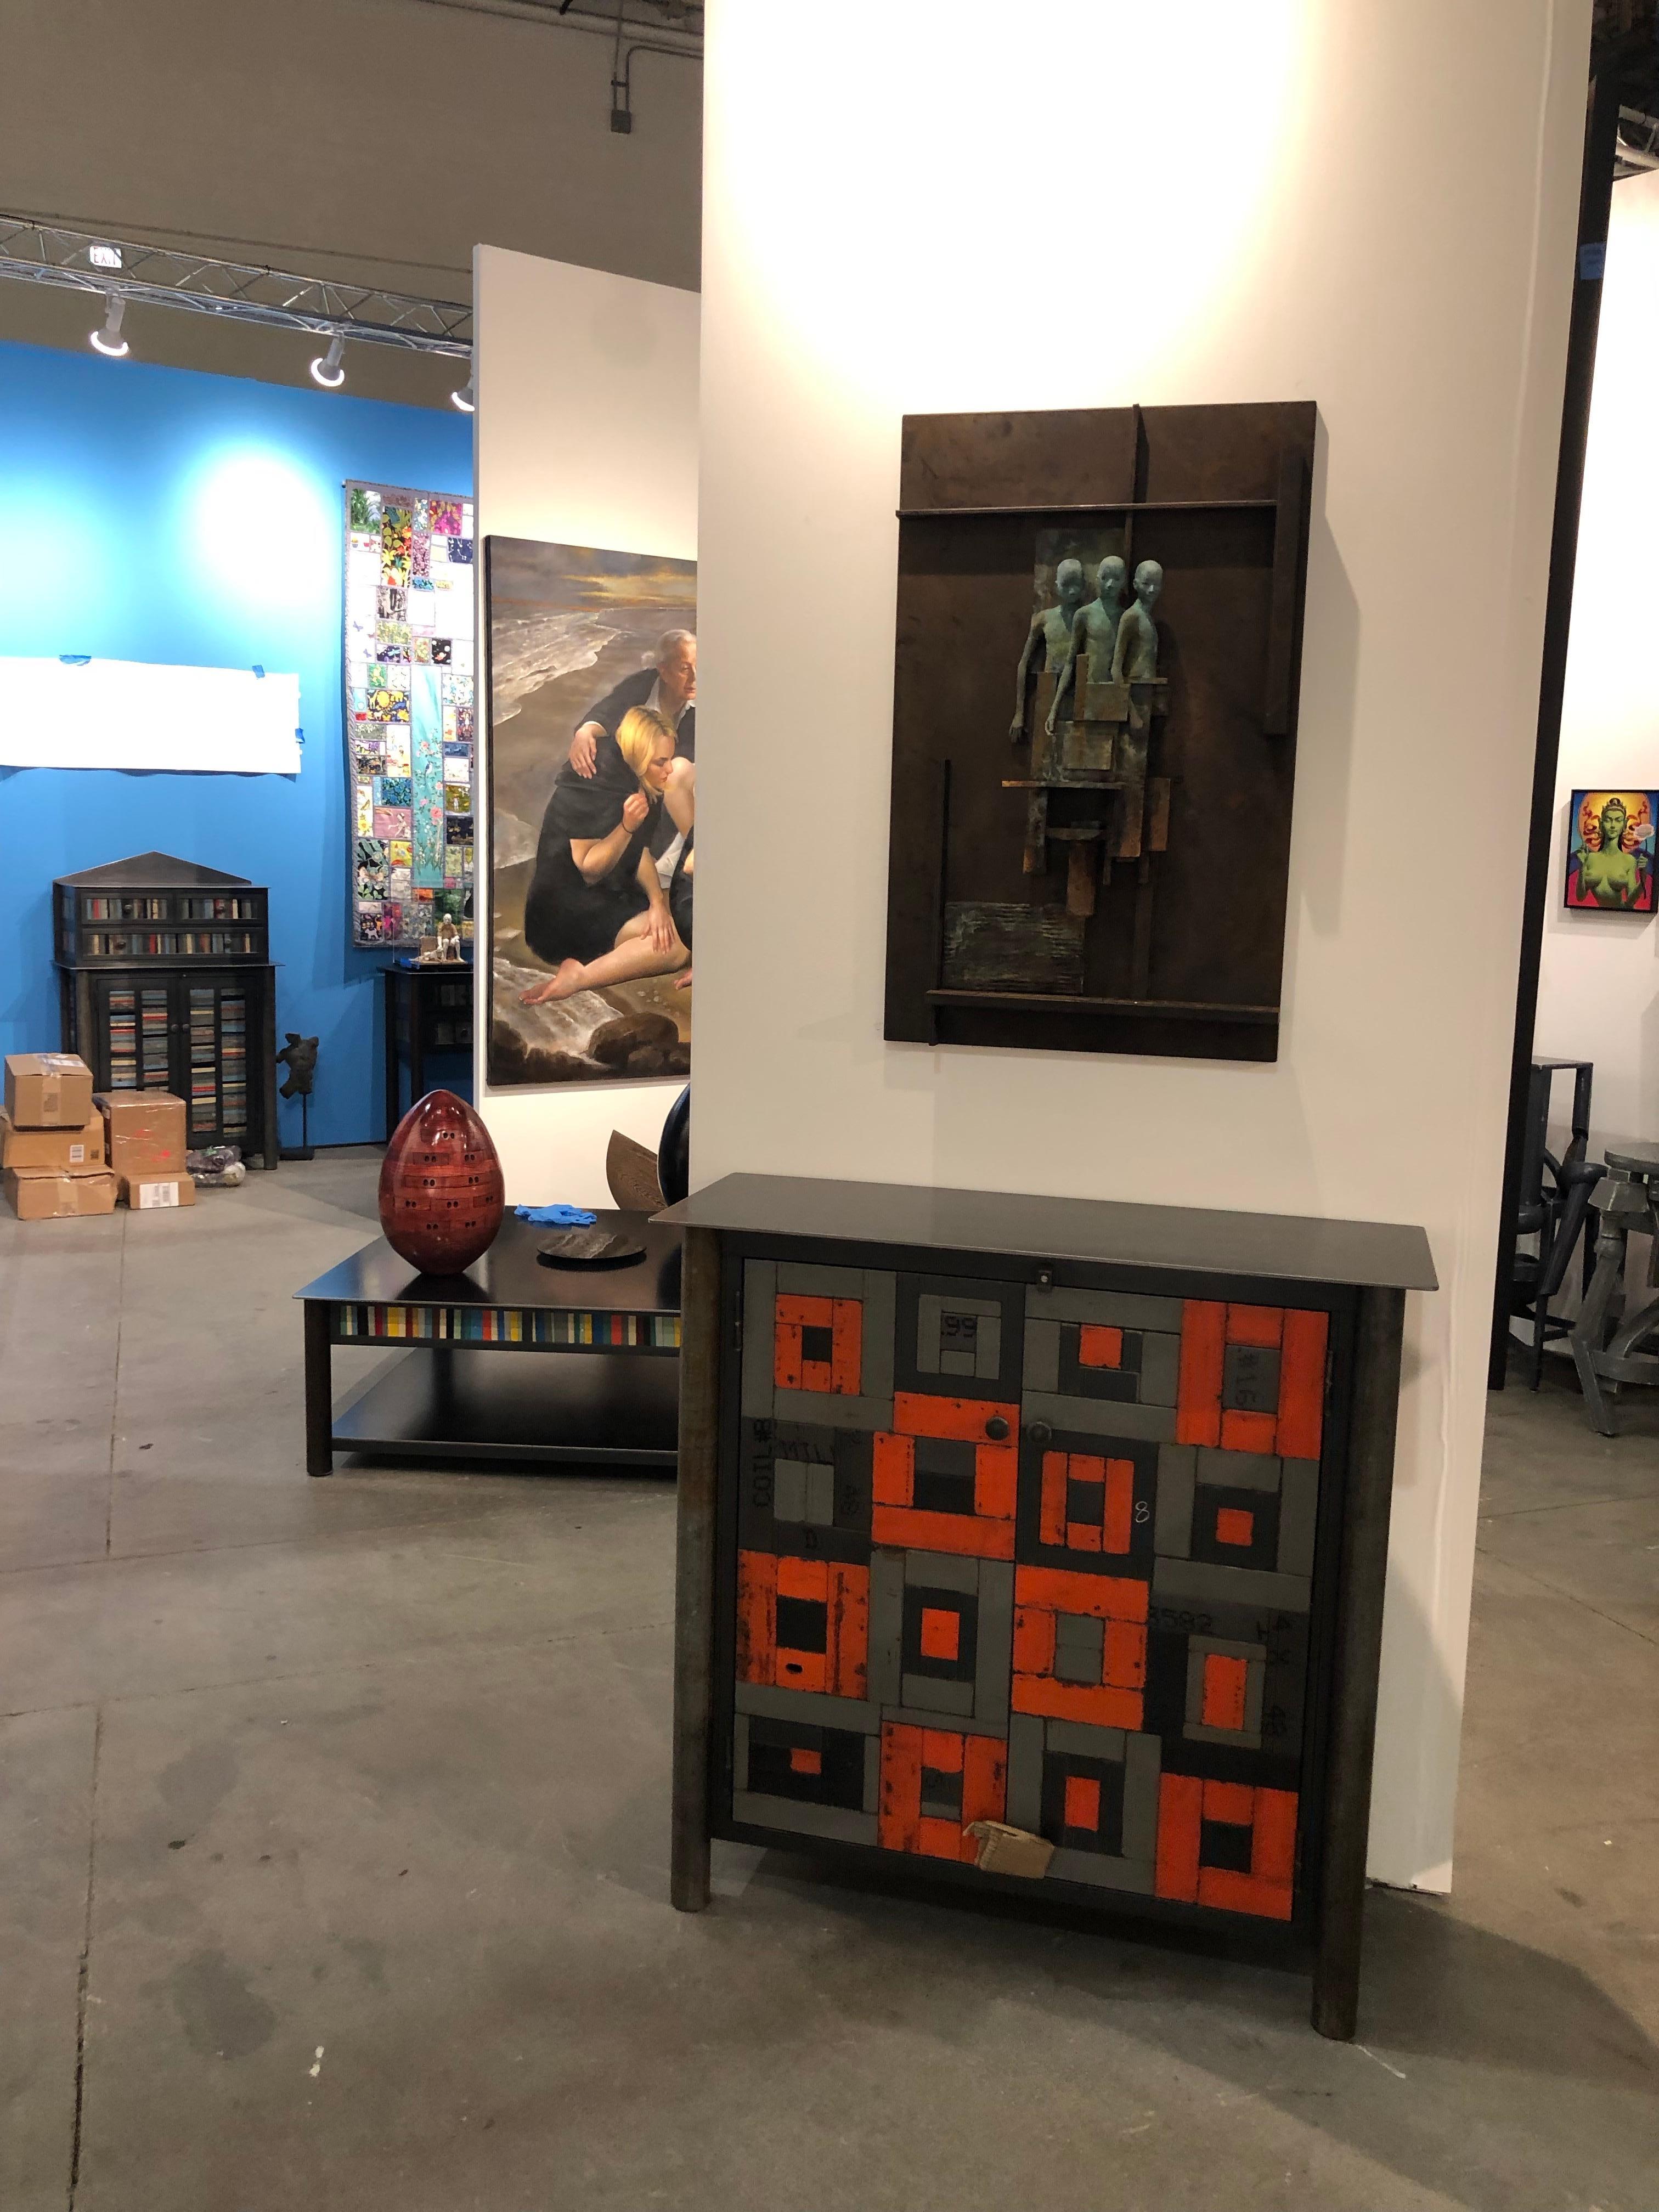 This totally functional modern industrial cabinet is created from hot-rolled steel and found painted panels is the ultimate example of sustainable design.  The color is original to the steel and uses salvaged and recycled materials.  In this case,